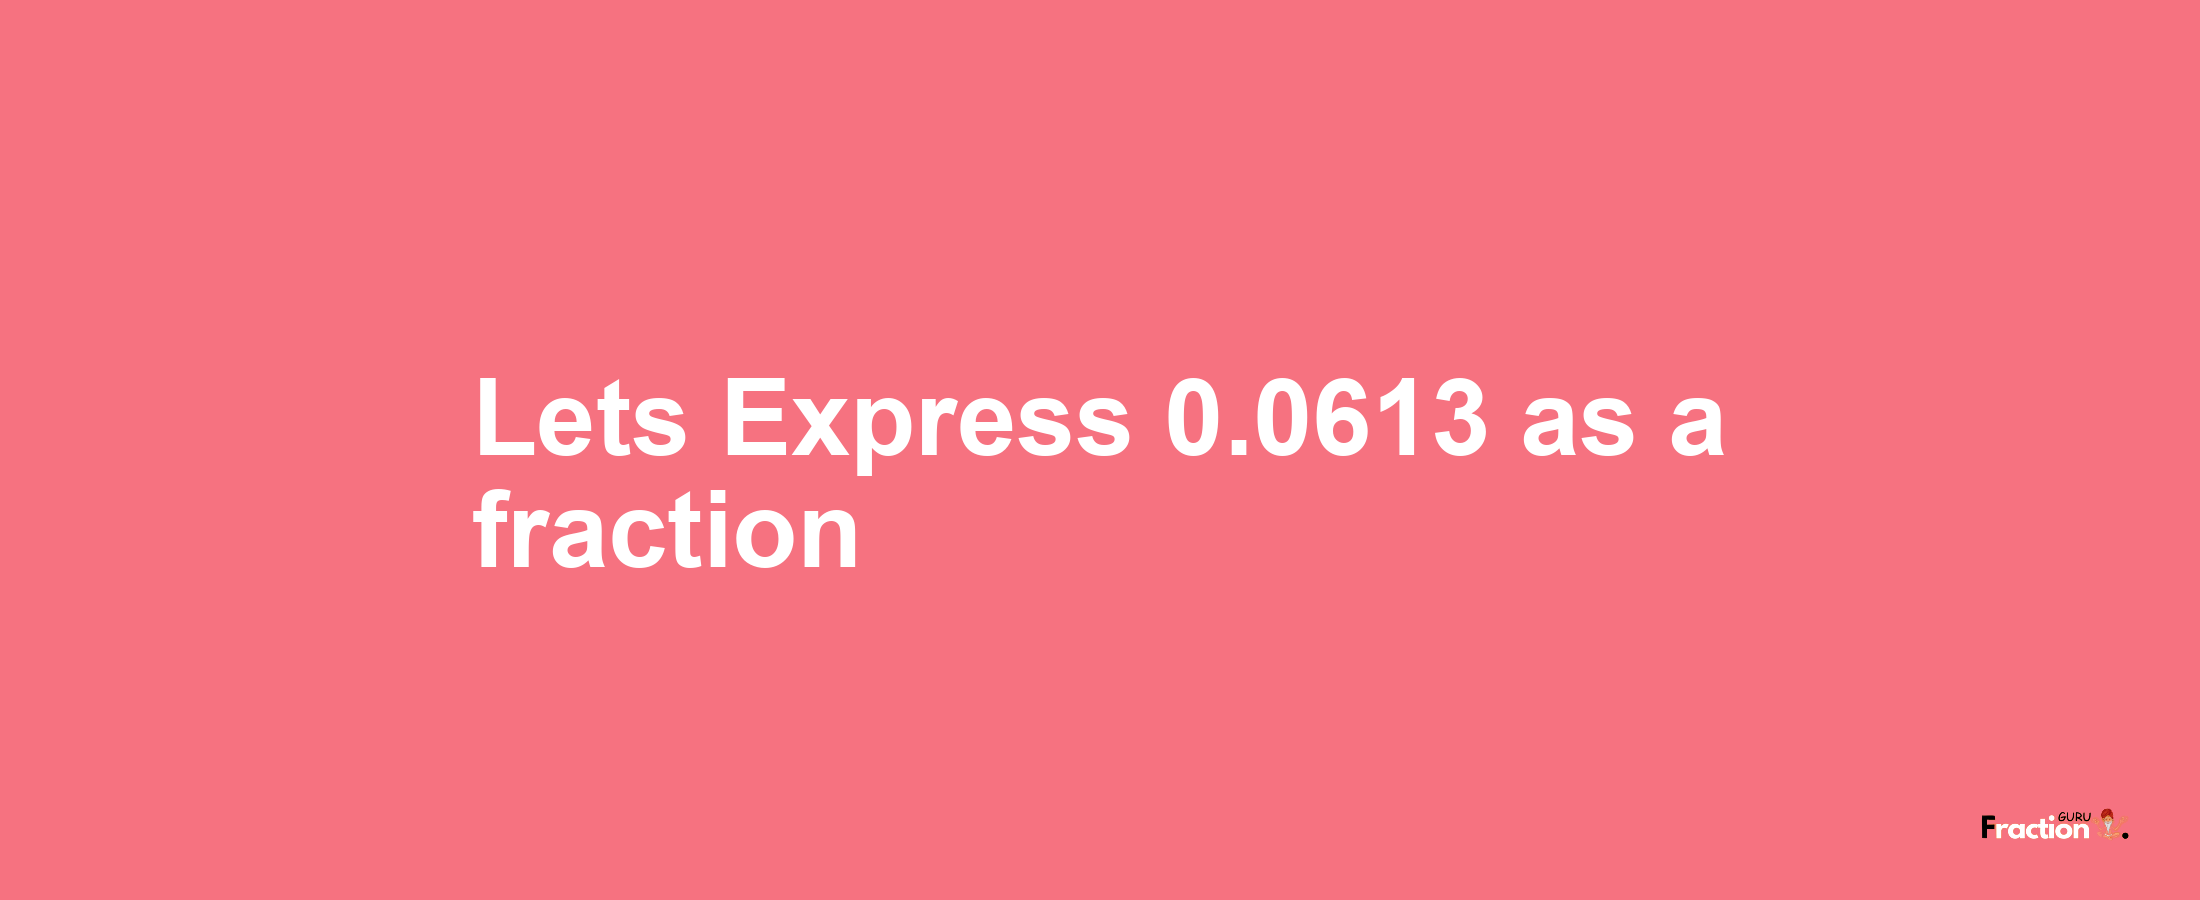 Lets Express 0.0613 as afraction